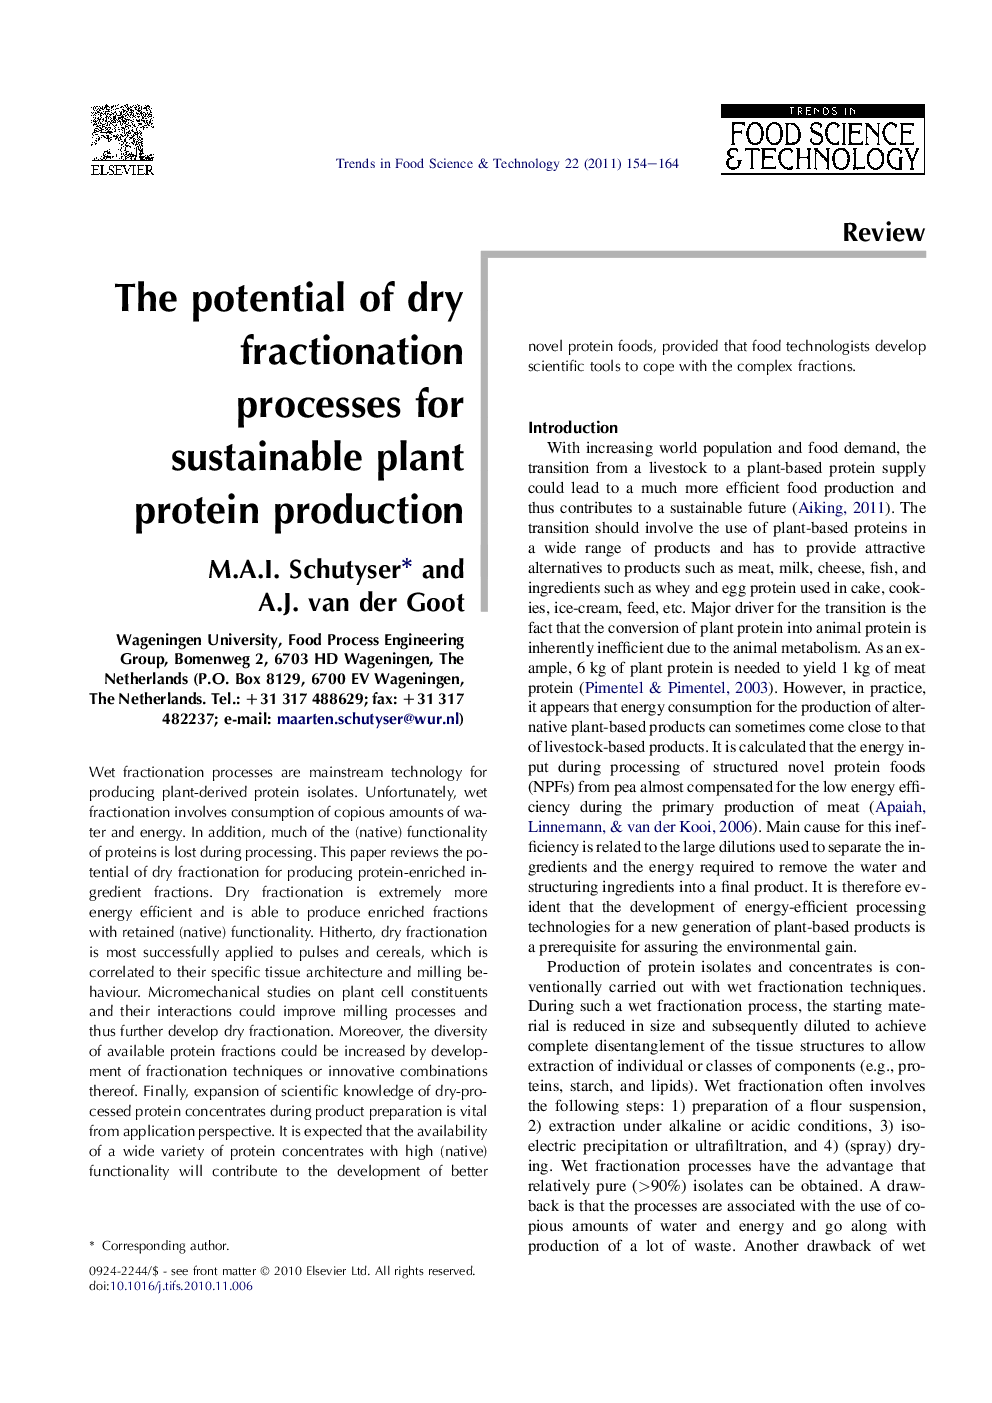 The potential of dry fractionation processes for sustainable plant protein production